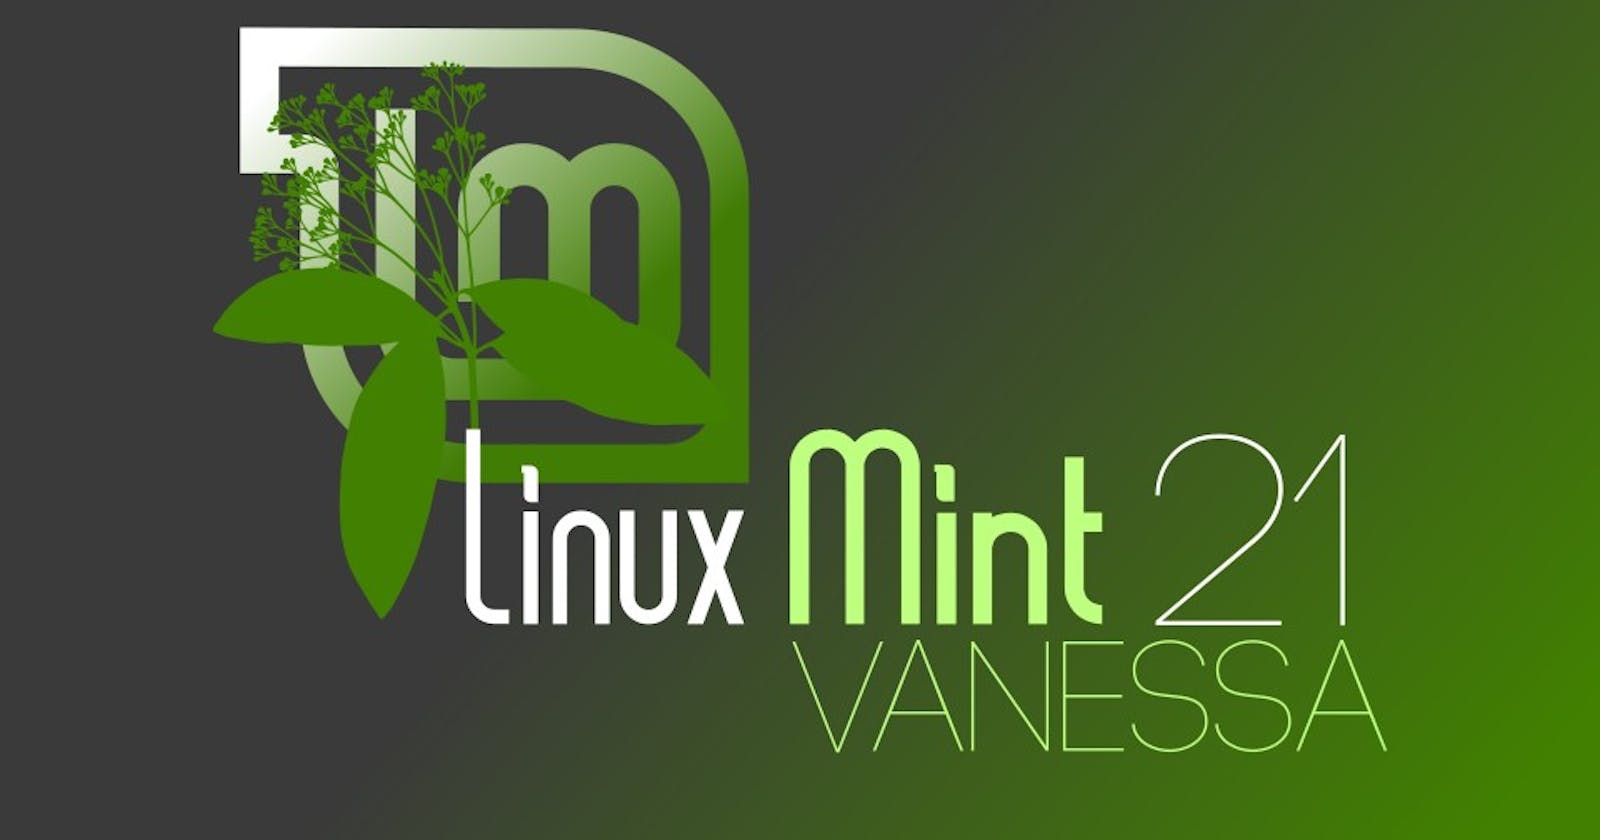 How to install Flameshot on Linux Mint 21 vanessa or any other Ubuntu-based Linux distribution via the terminal emulator